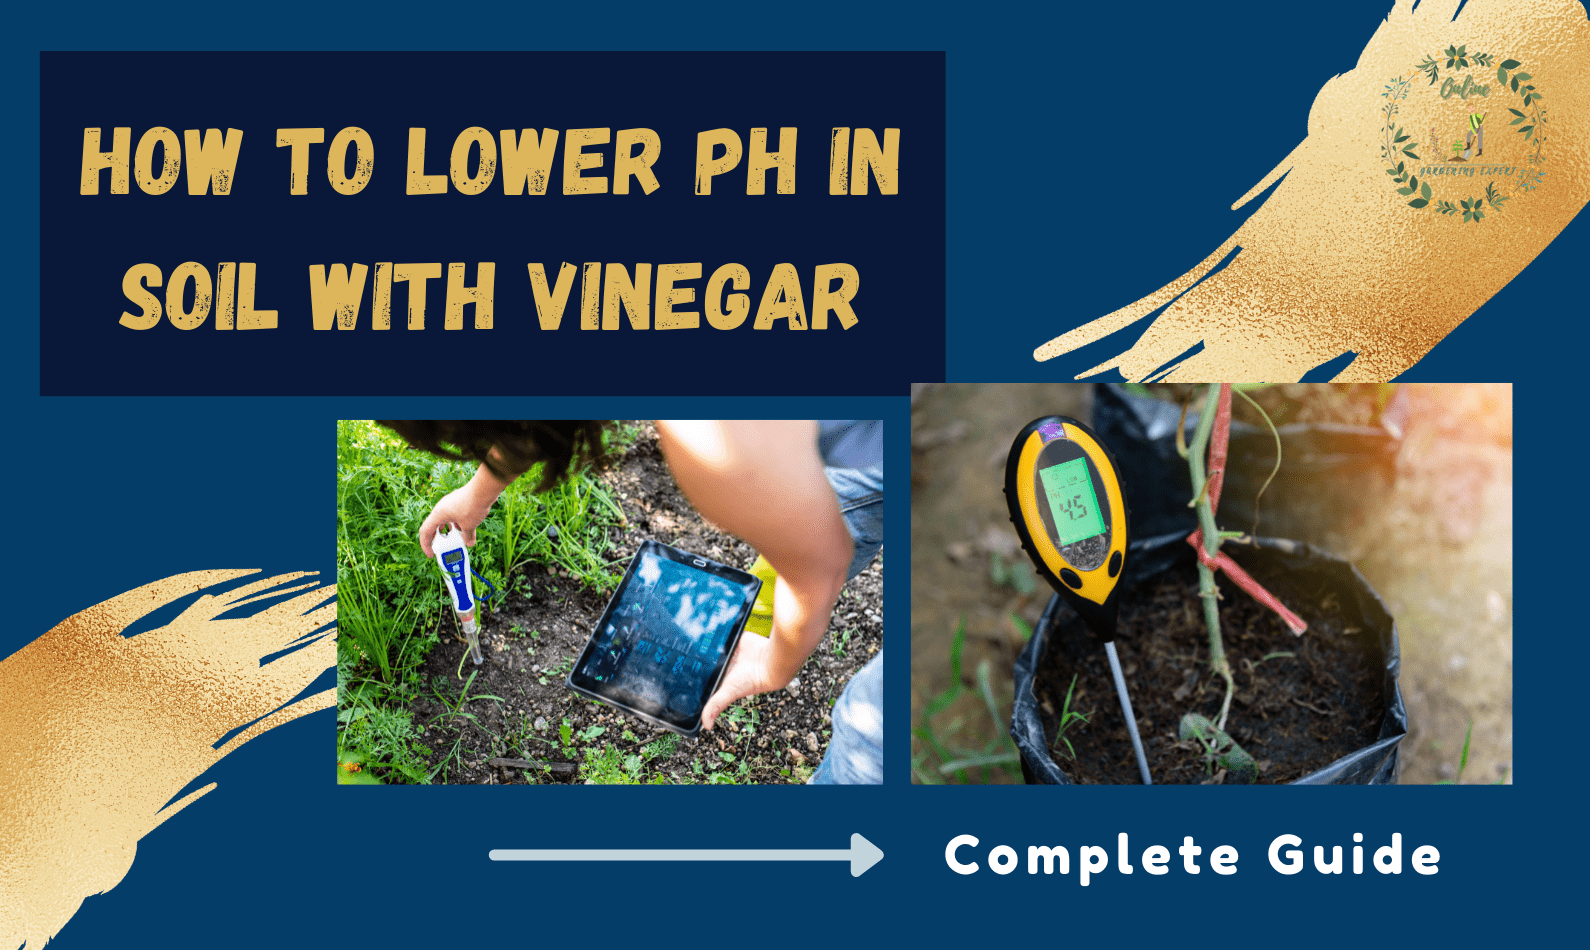 How to Lower pH in Soil with Vinegar